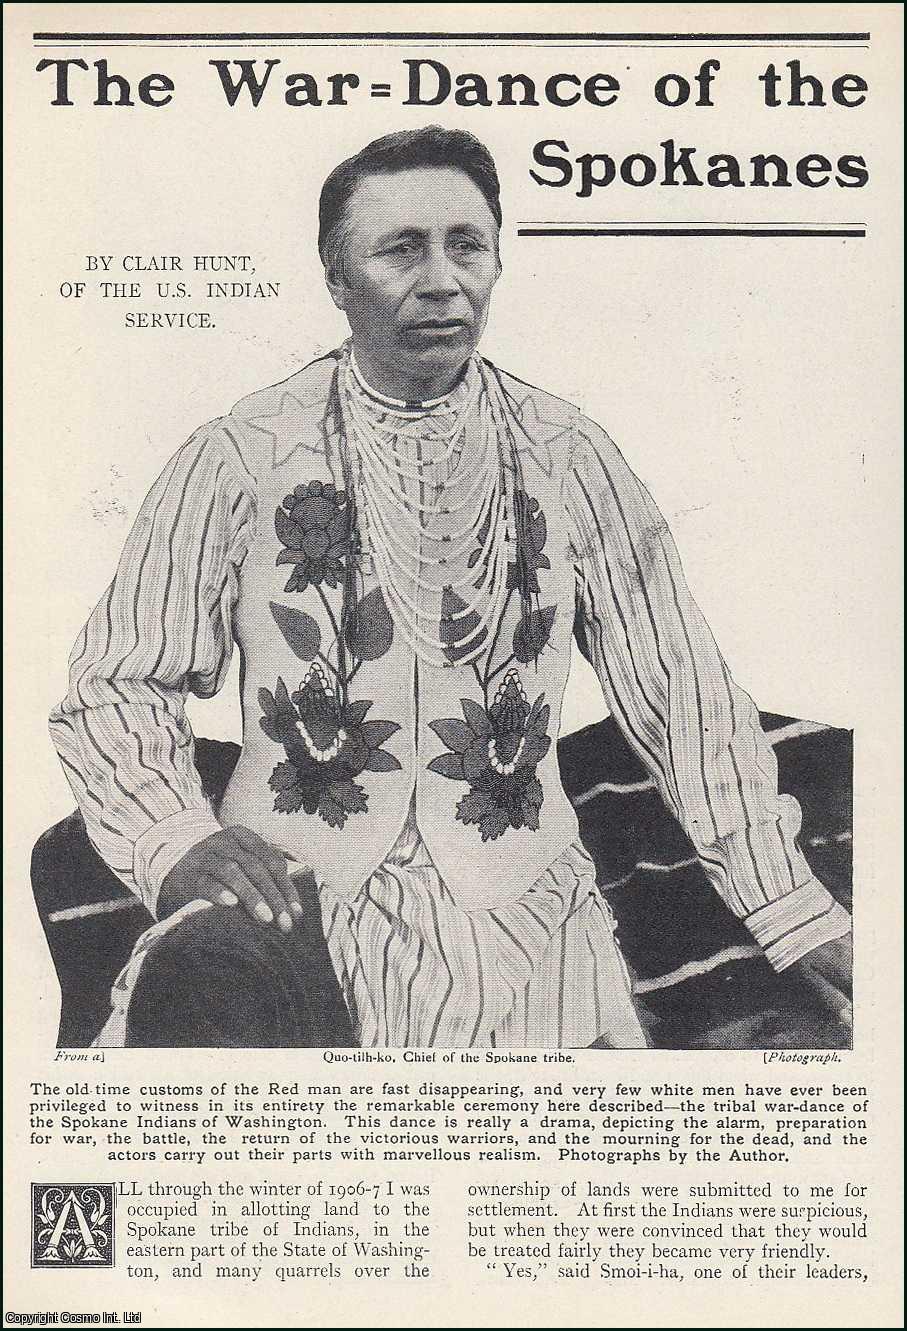 Clair Hunt, of the U.S. Indian Service., Clair - The War-Dance of the Spokane Indians of Washington. An uncommon original article from the Wide World Magazine, 1912.